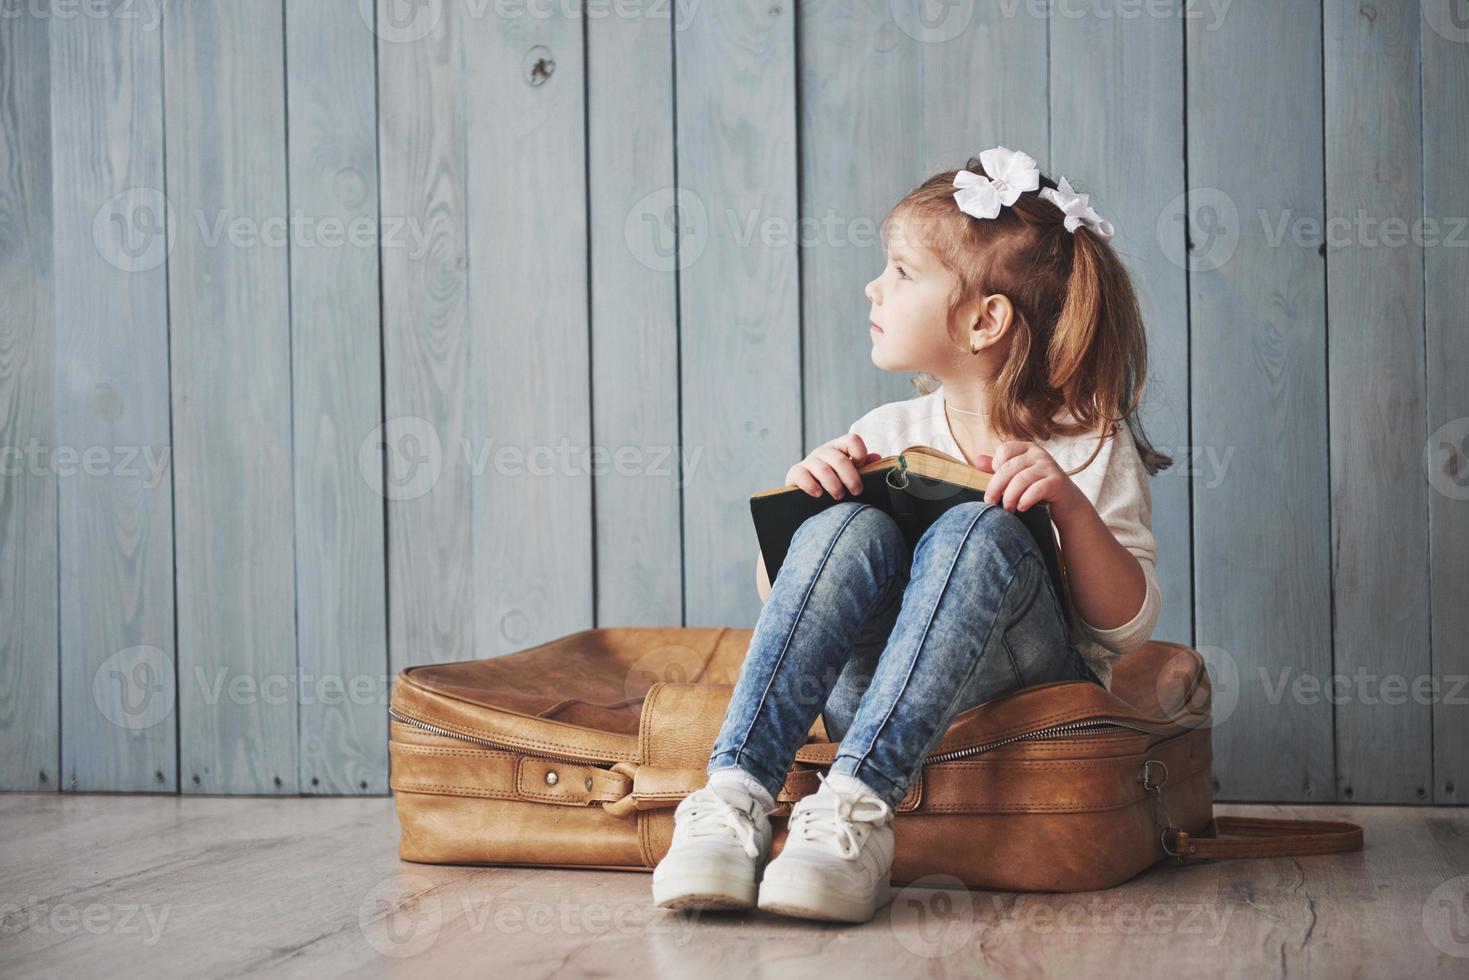 Ready to big travel. Happy little girl reading interesting book carrying a big briefcase and smiling. Travel, freedom and imagination concept photo